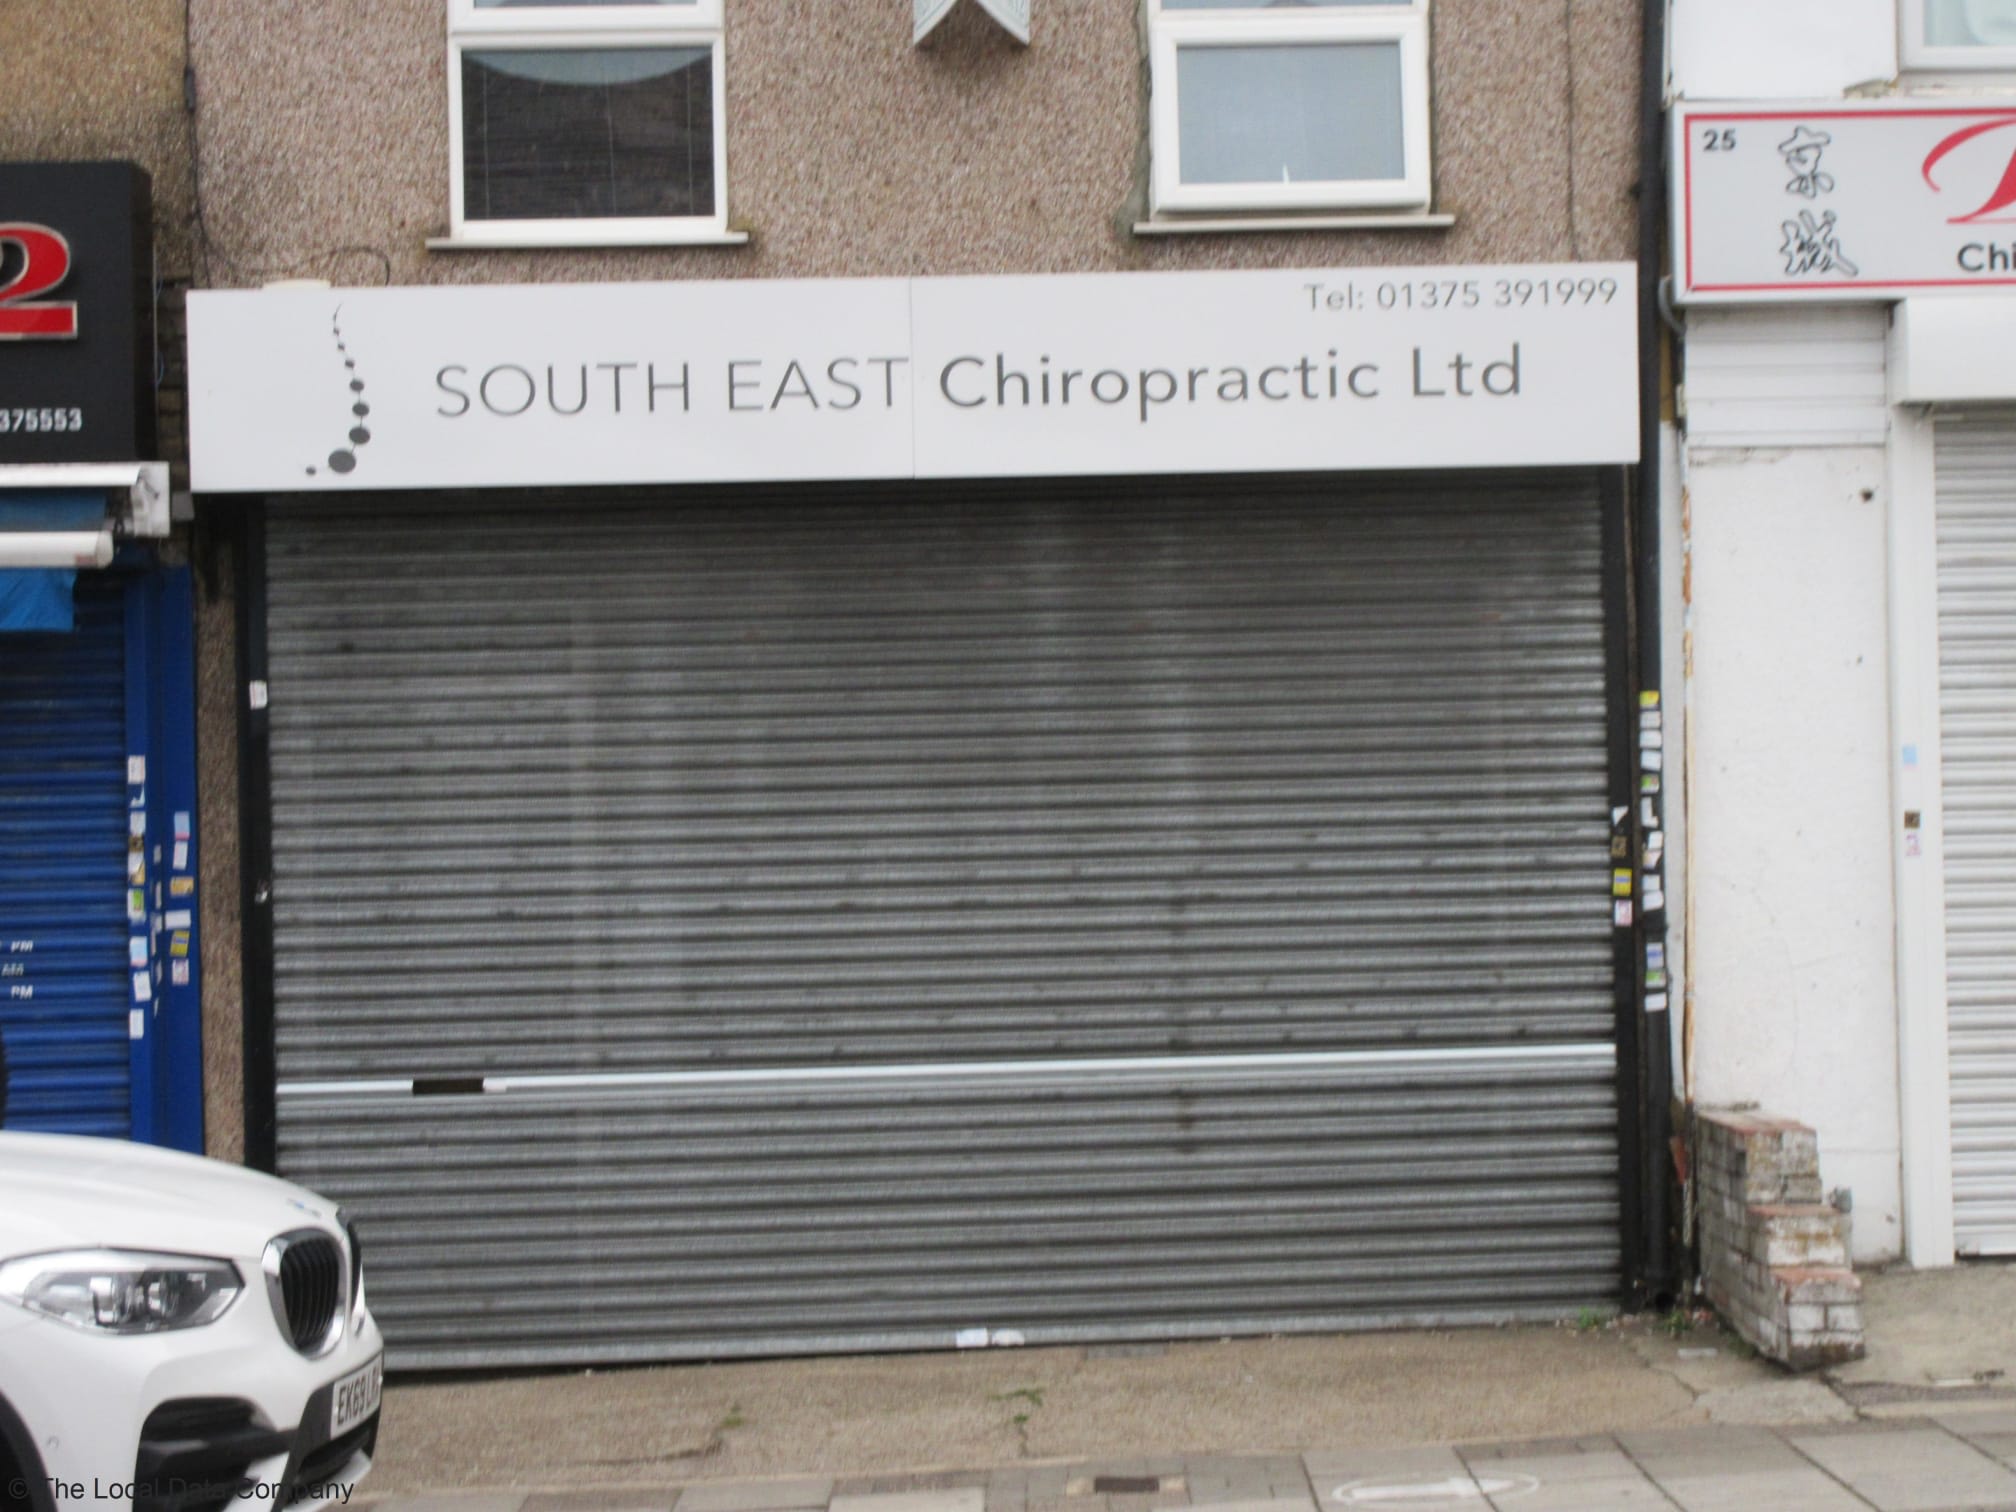 South East Chiropractic Ltd Grays 01375 391999